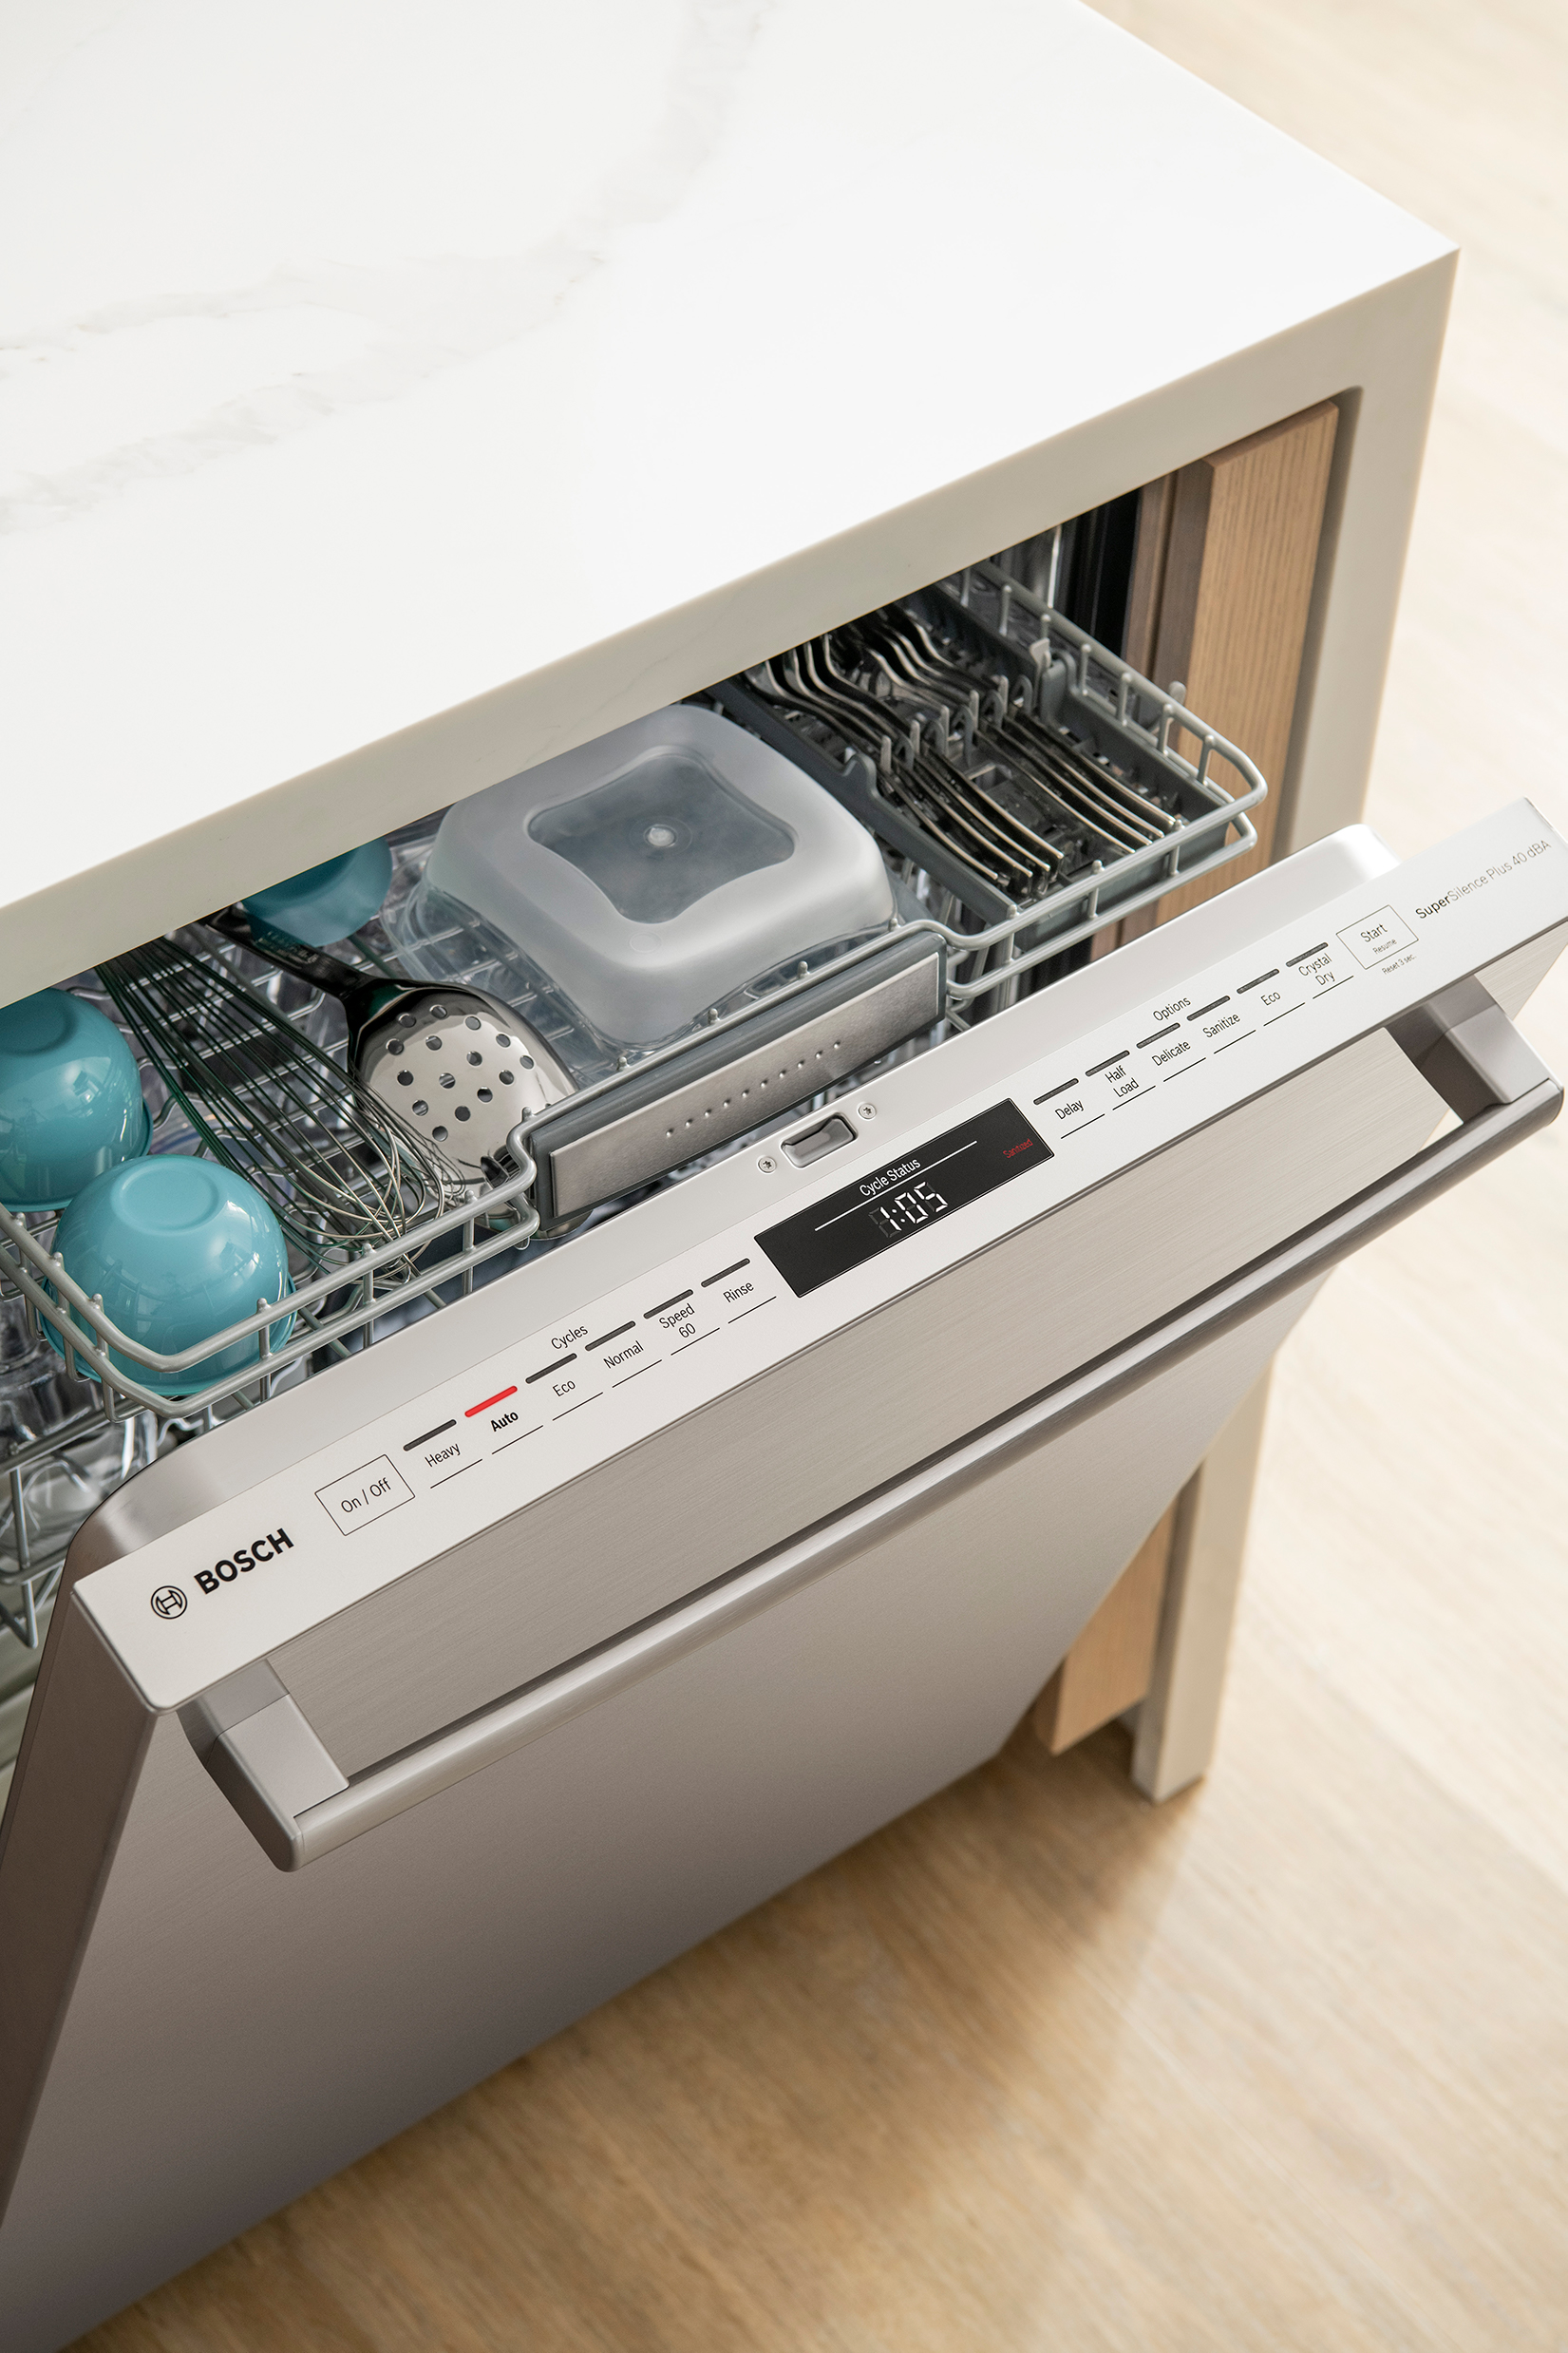 New Bosch 800 Series Dishwasher with CrystalDry Technology at Best Buy